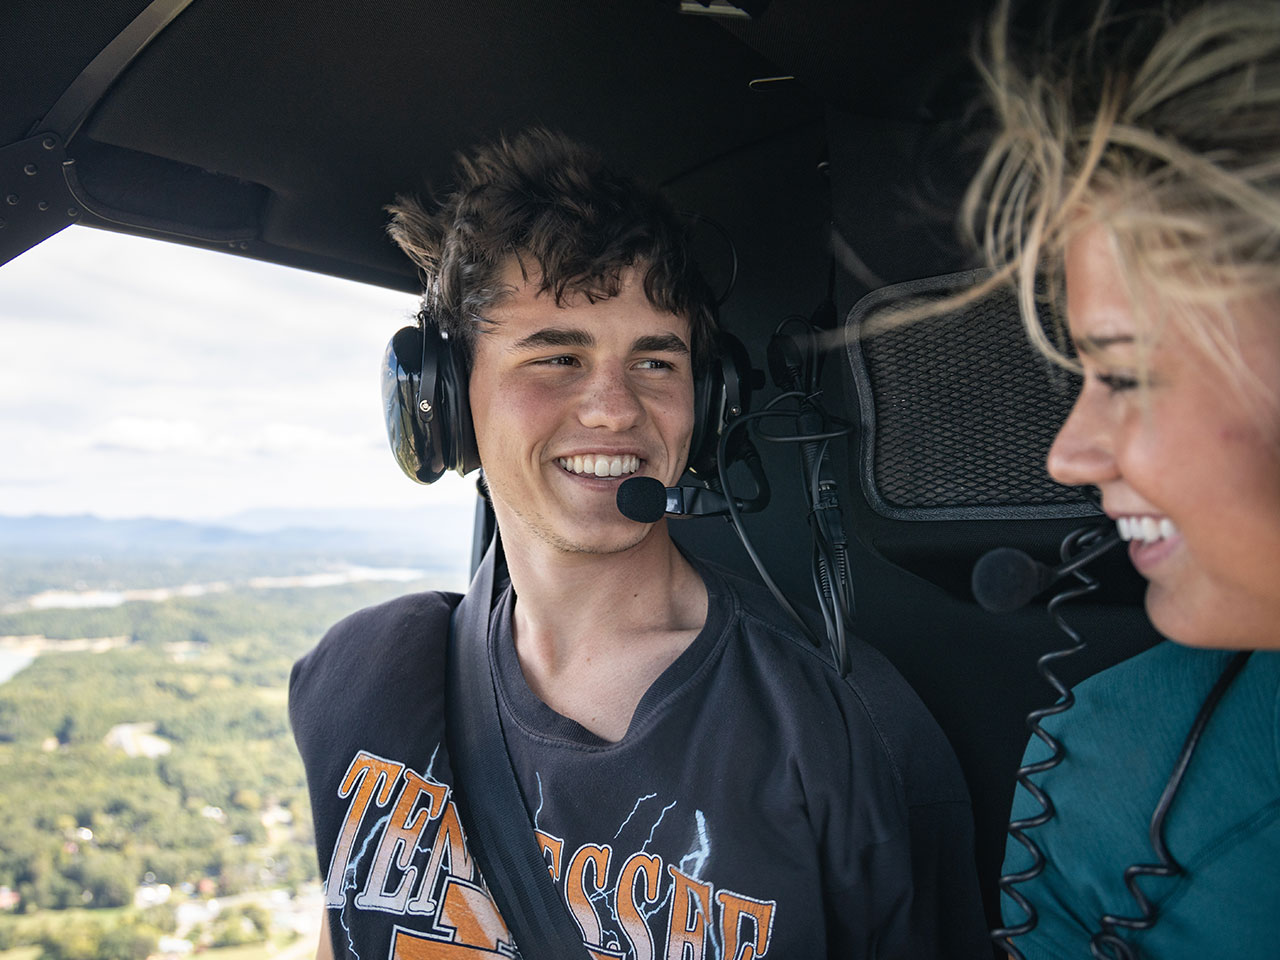 Smoky-Mtn-Helicopter-Ride-5